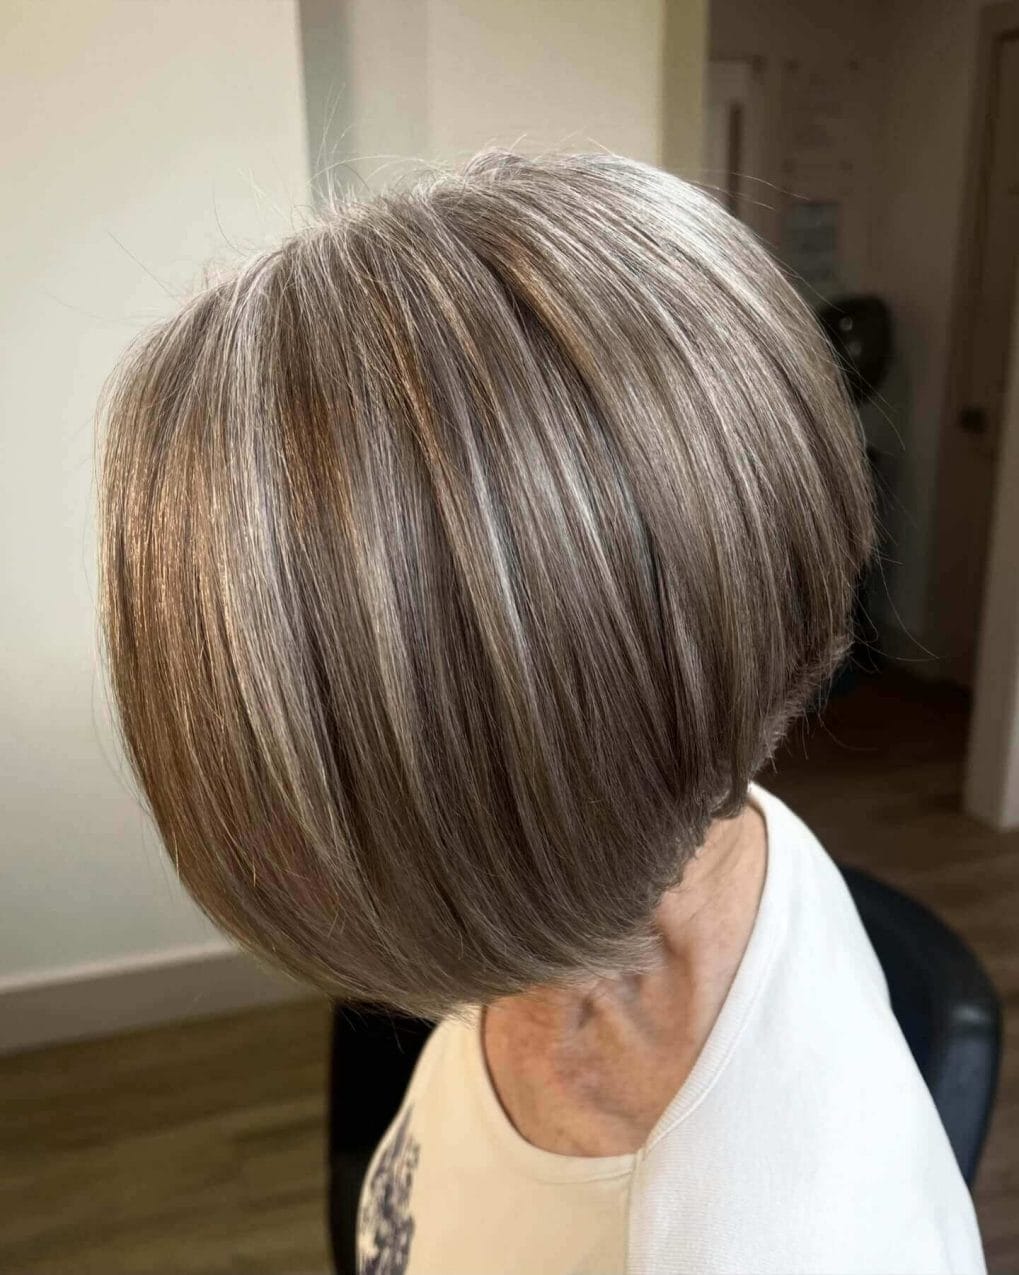 Soft rounded wedge haircut in silver and ash-blonde